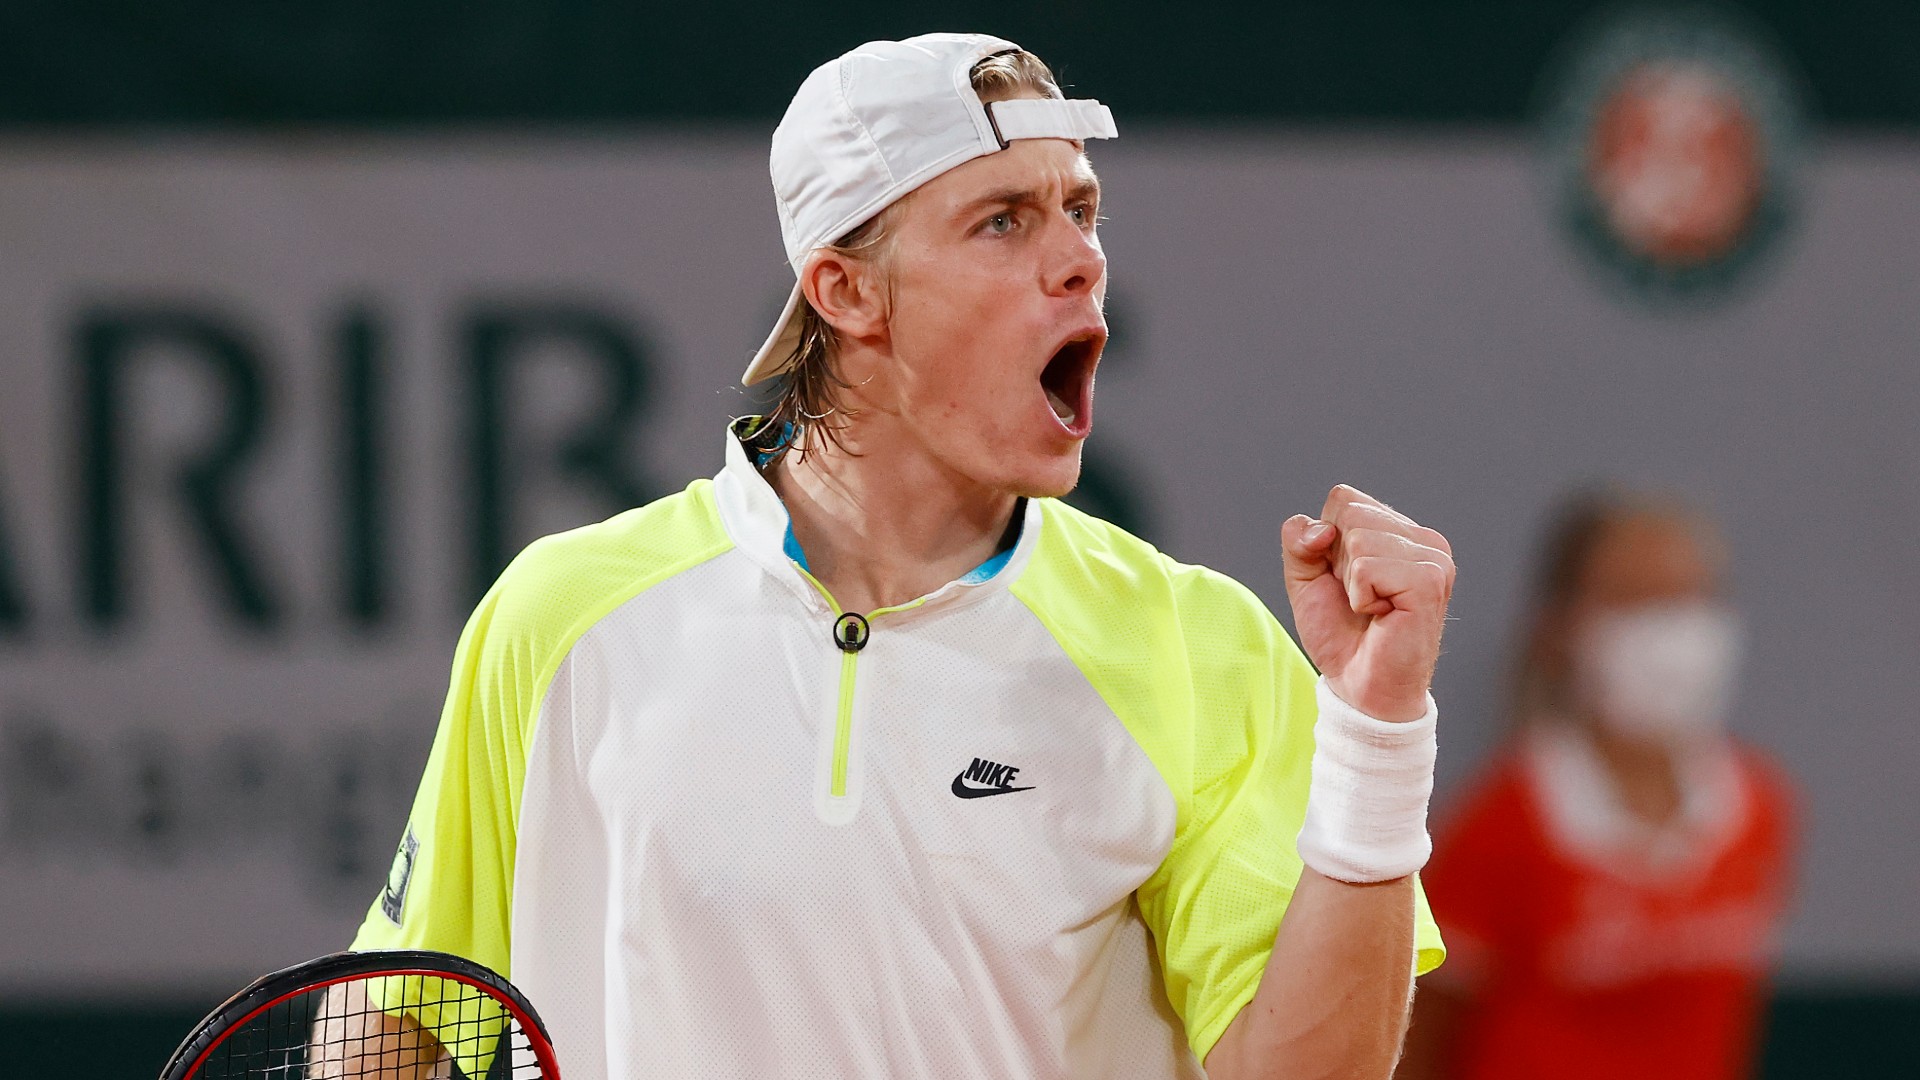 French Open 2020: Denis Shapovalov continues strong play, advances at